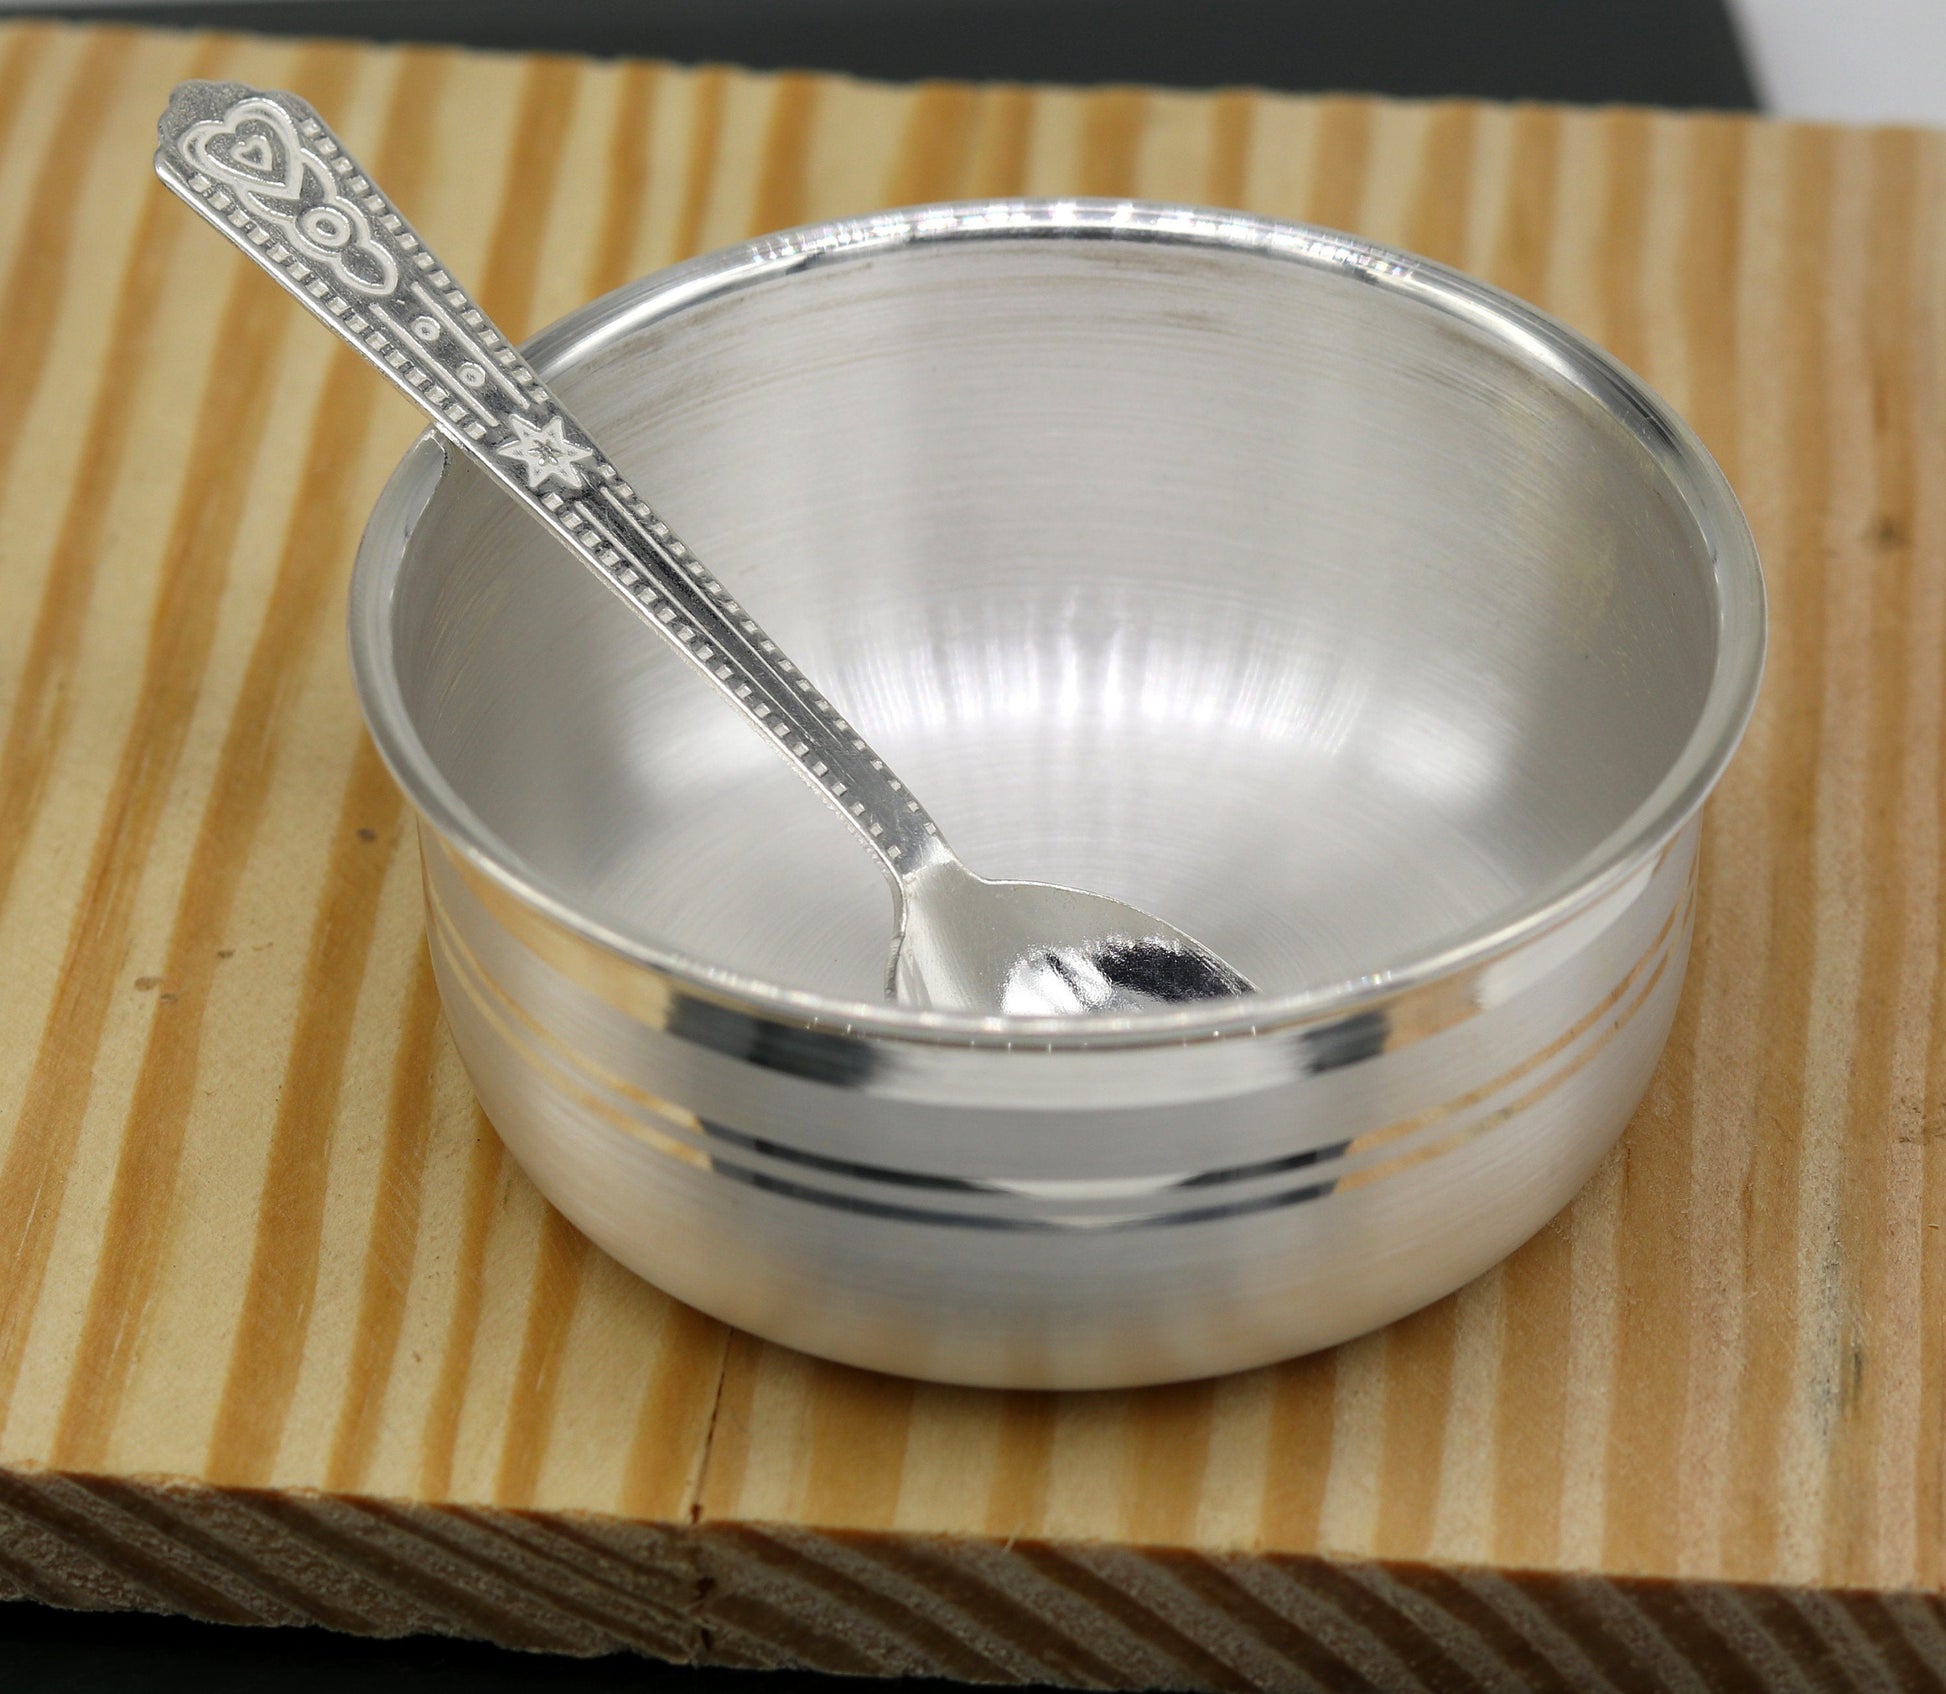 999 pure fine silver handmade silver bowl and spoon set, silver has antibacterial properties,stay baby/kids healthy, silver vessels sv42 - TRIBAL ORNAMENTS